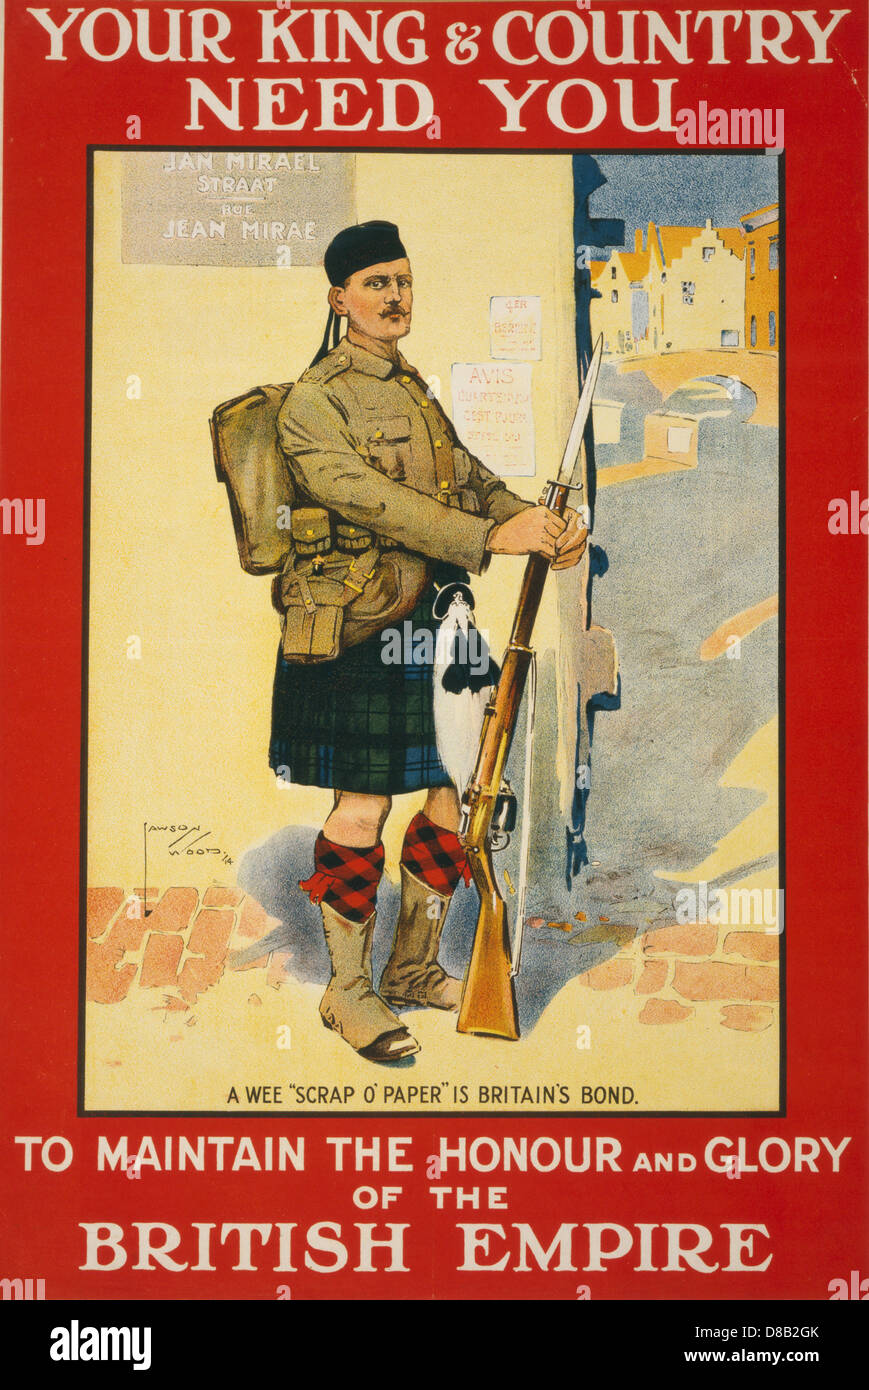 Your king & country need you to maintain the honour and glory of the British Empire 1914 British Enlist Propaganda Stock Photo